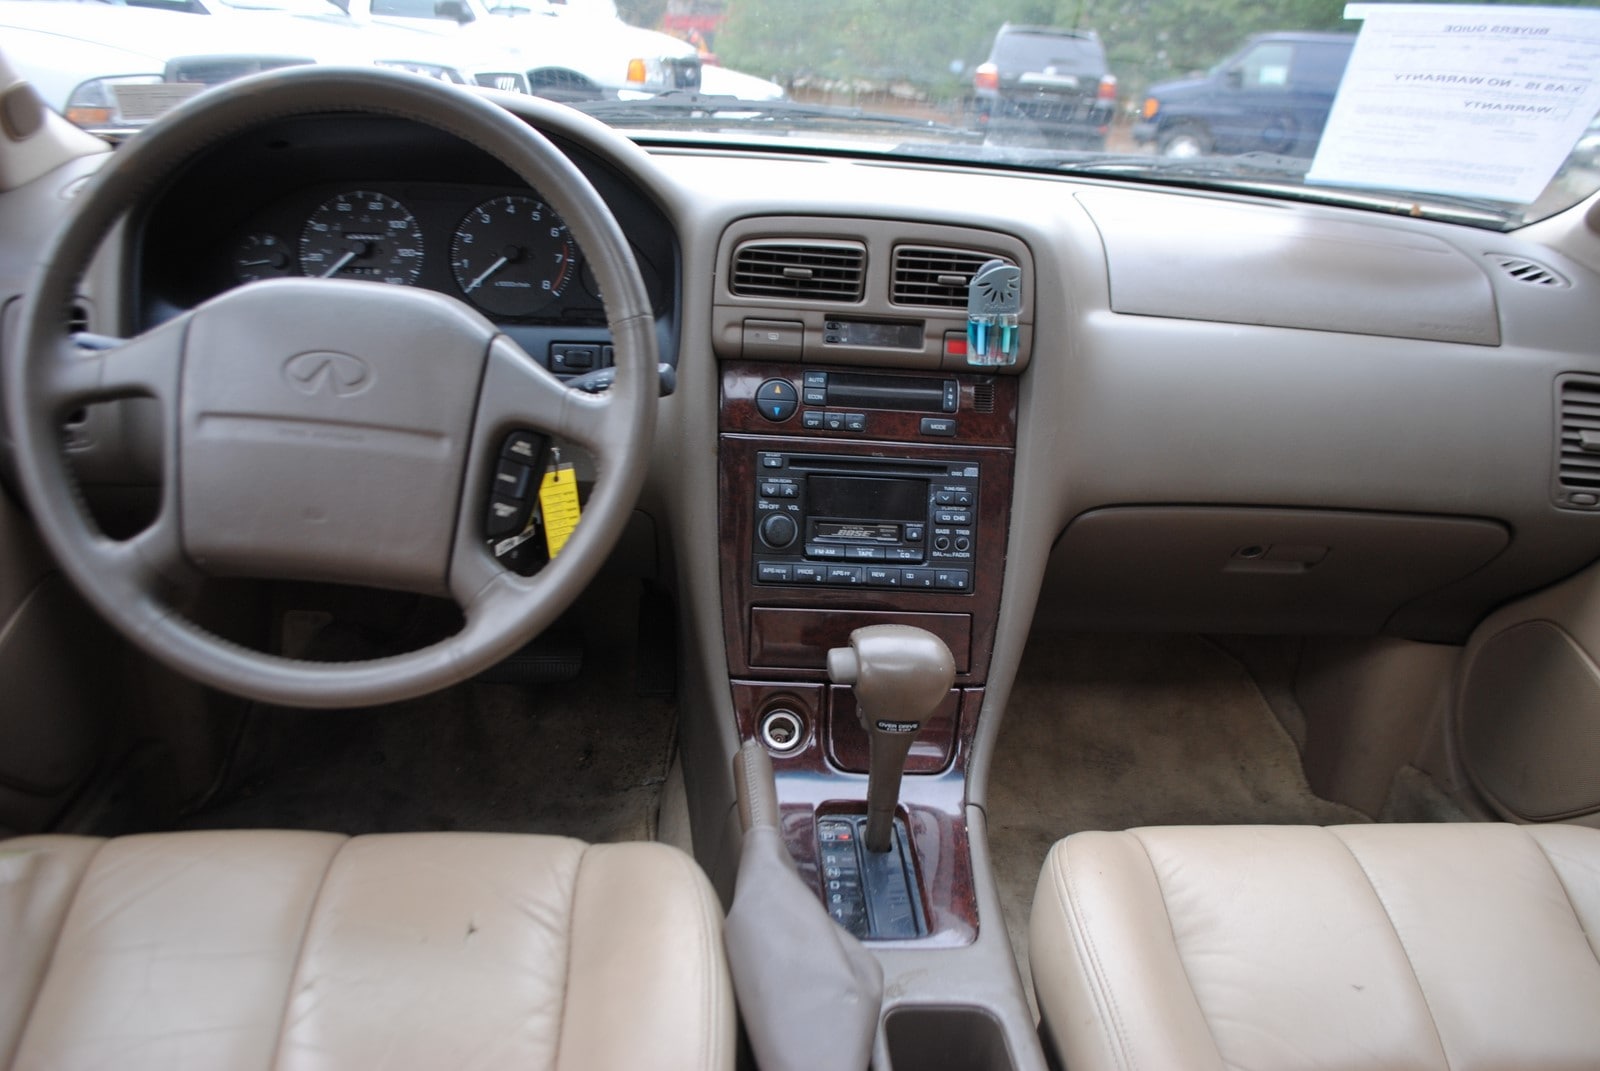 Used 1997 INFINITI I30 For Sale at Ramsey Corp. | VIN: JNKCA21D4VT505390